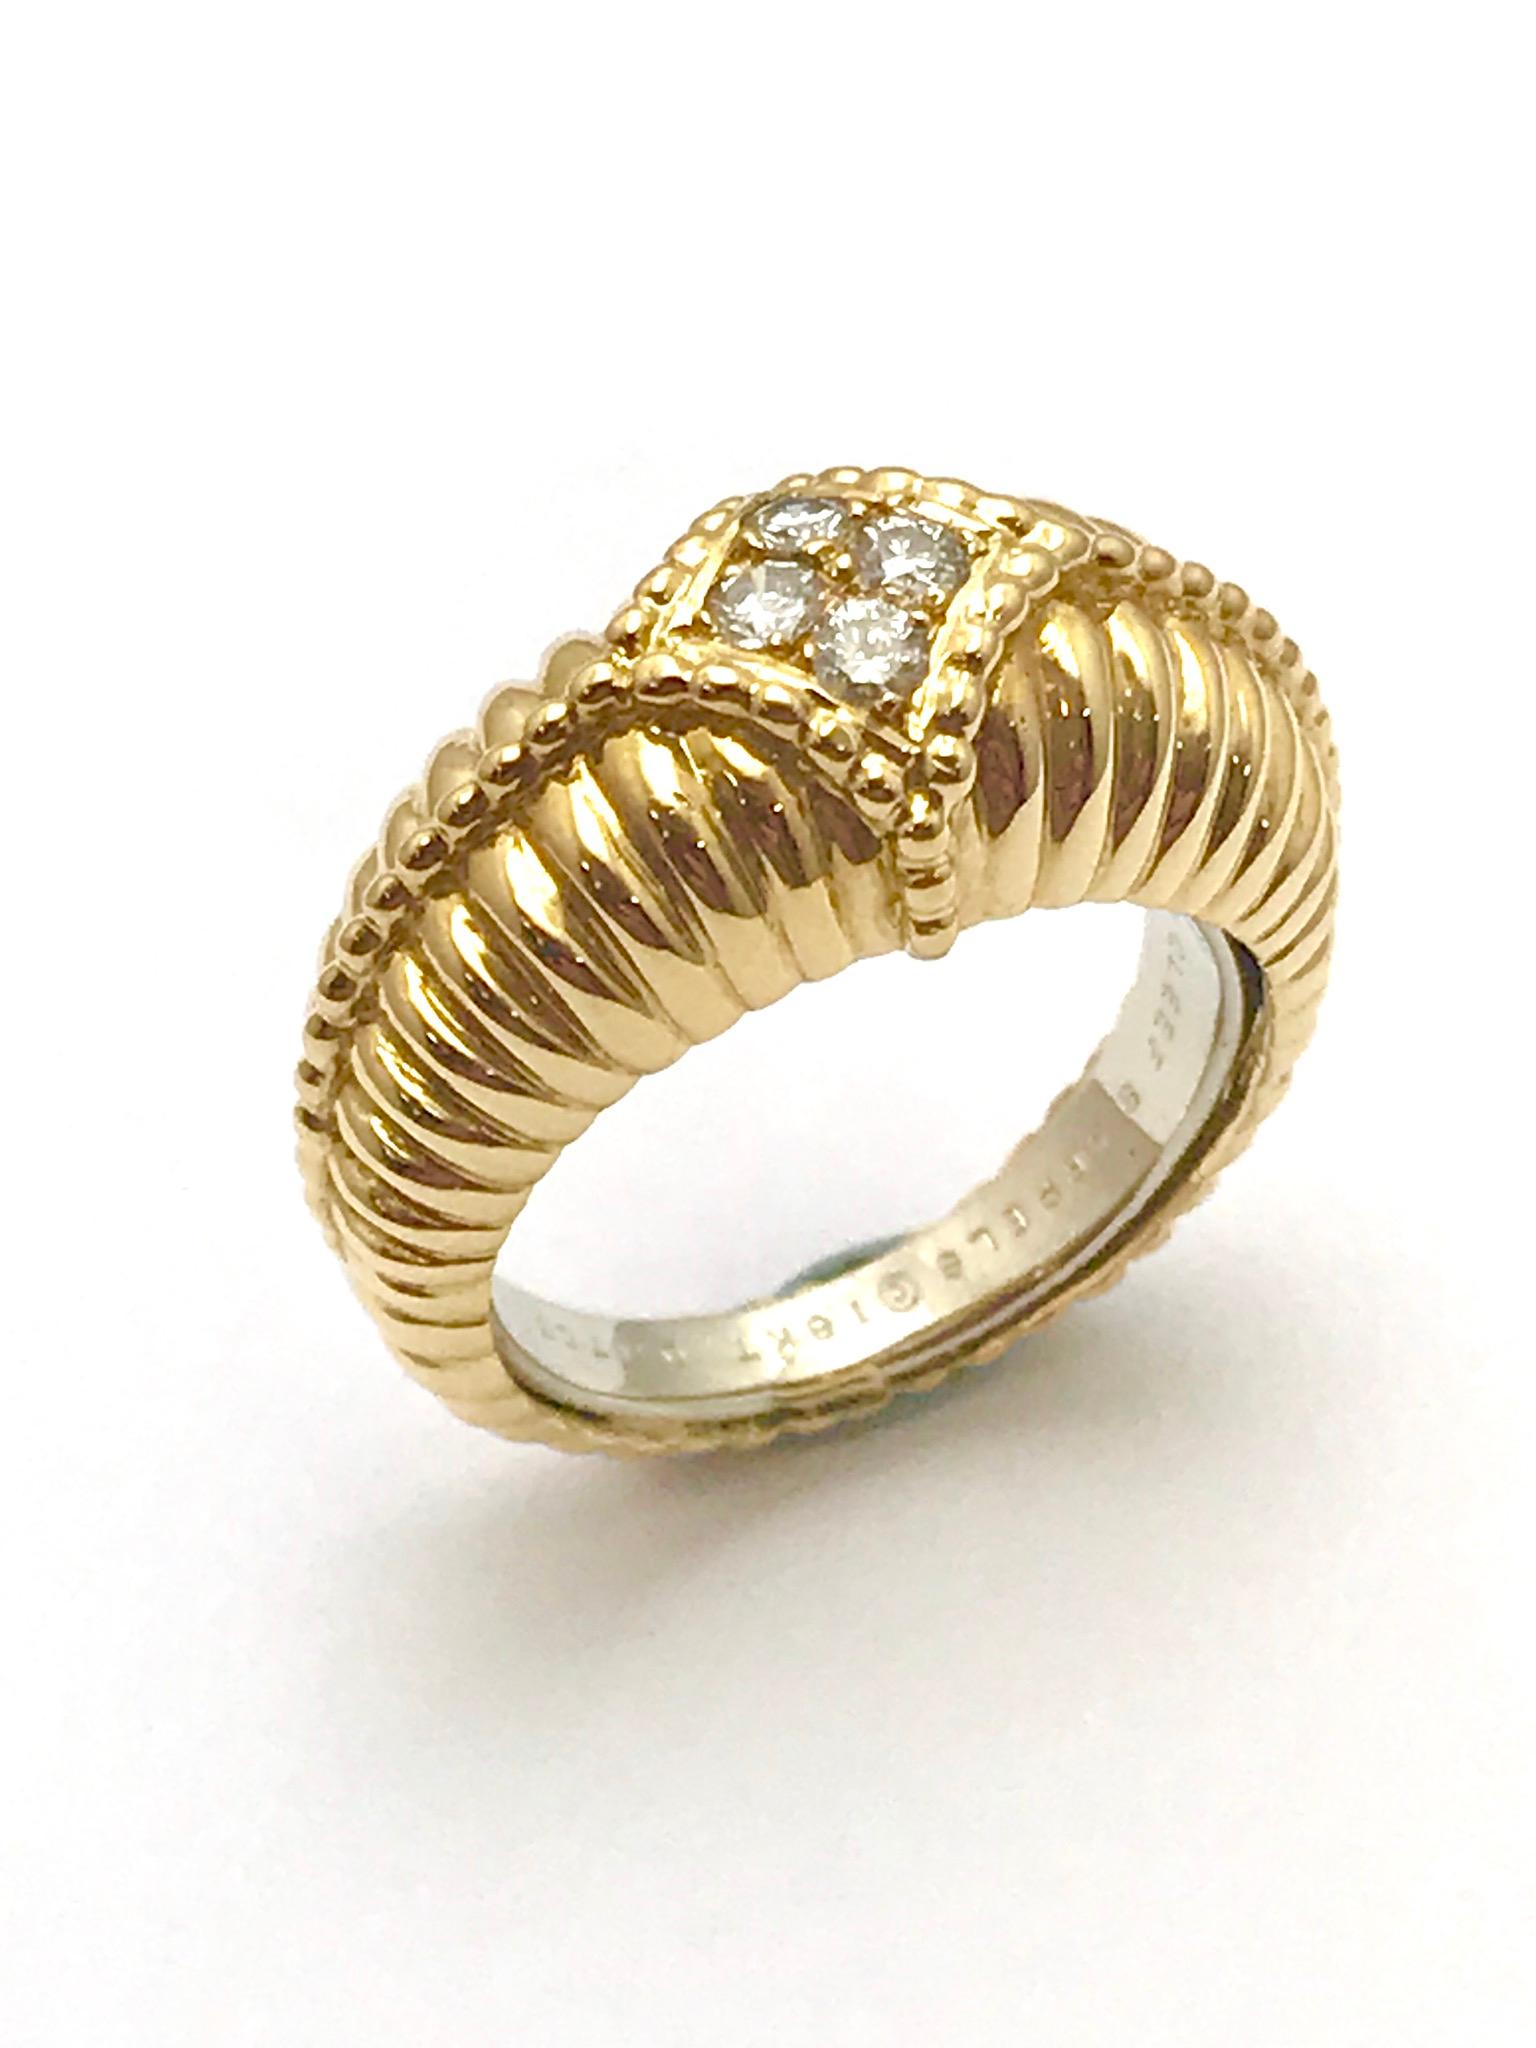 A Van Cleef & Arpels diamond and 18 karat yellow gold ring.  the ring is designed in a scalloped pattern with four diamonds in the framed in the center.  The diamonds are round brilliant cuts, graded as E-F color, VVS clarity, having a total weight